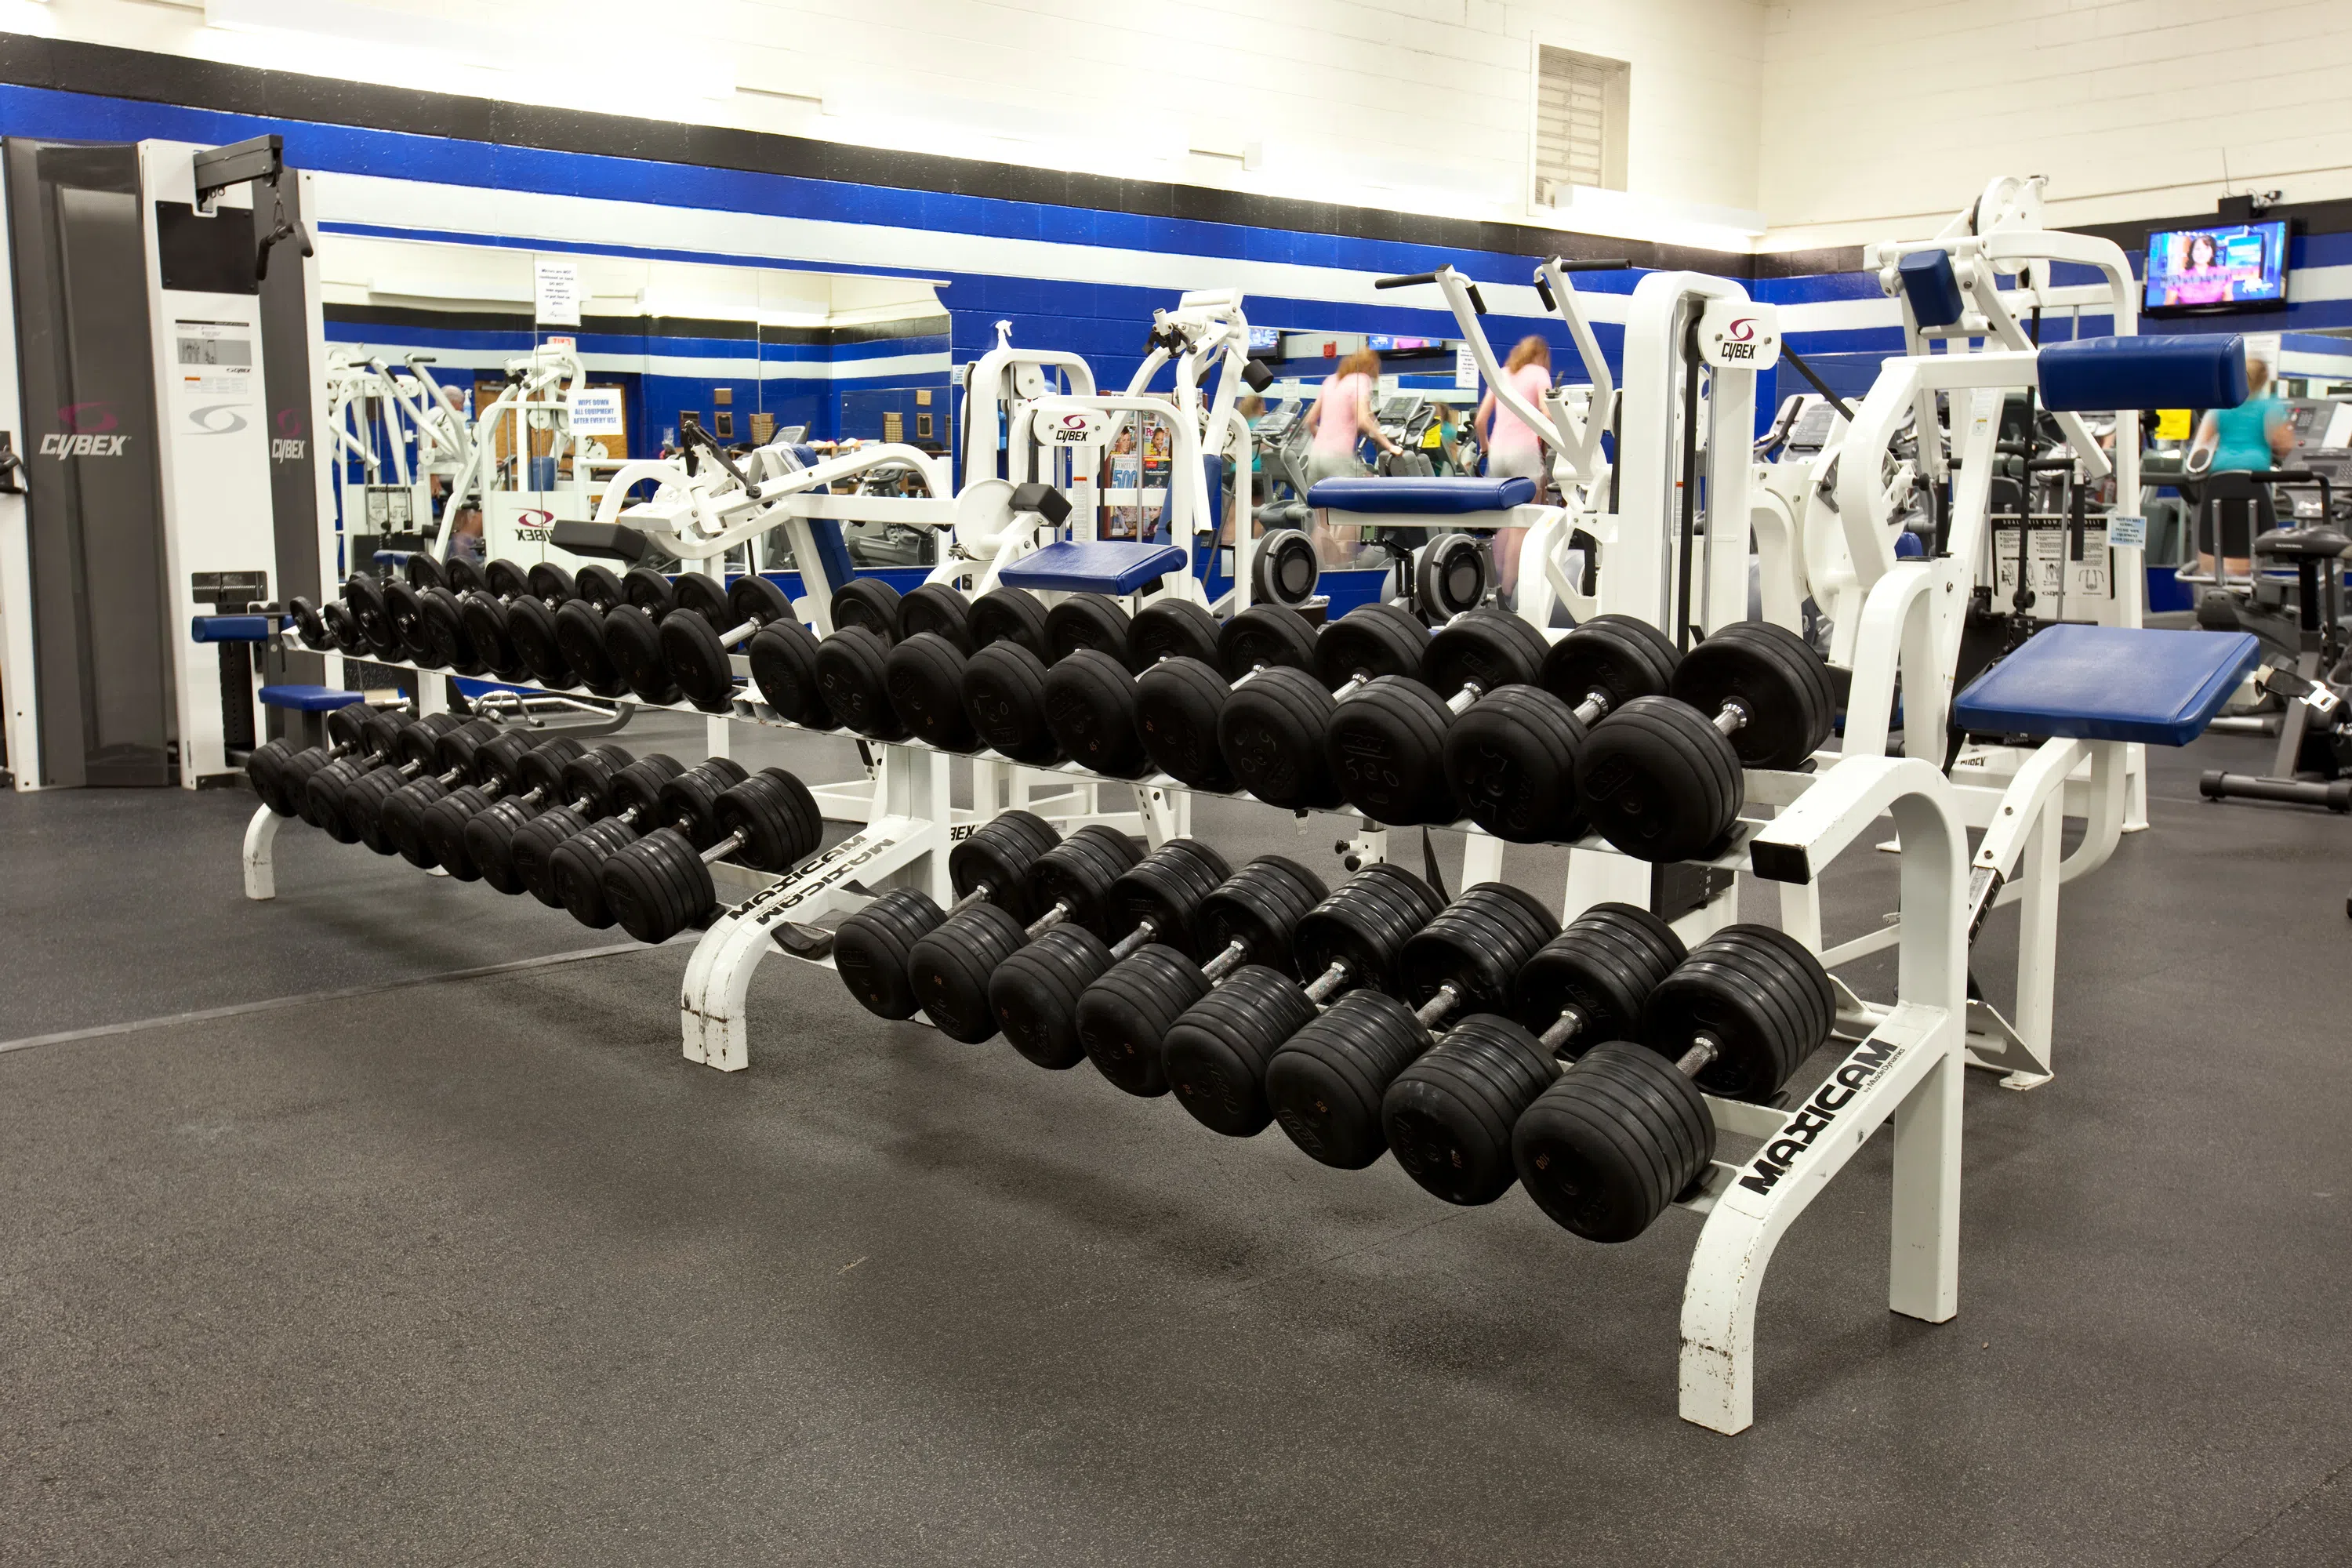 Rows of dumbbells in a fitness room